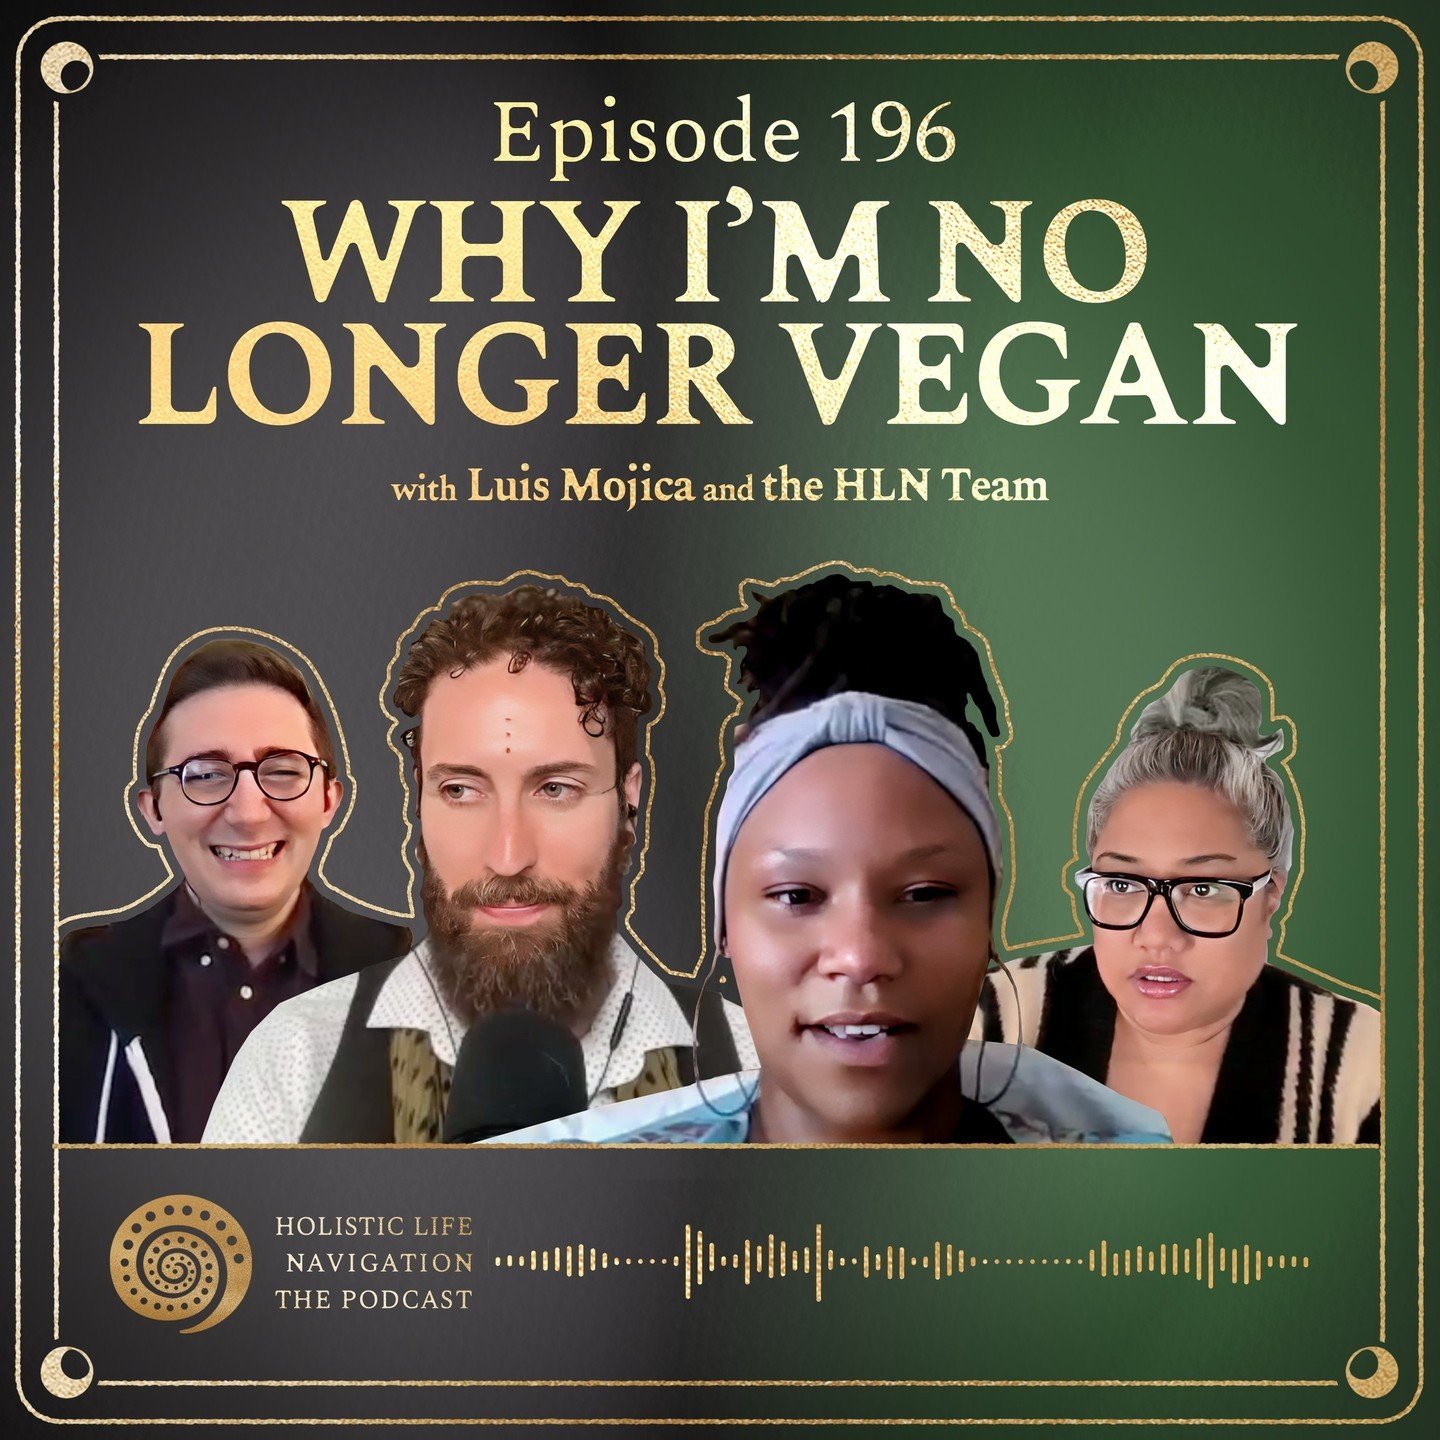 On today's episode, the HLN Team (@camille.leak @marikamalaea @emeraldlightsoundhealing) talks about veganism. Luis recently shifted away from a purely vegan diet, and the HLN Team discusses their own personal experiences with diet, as well as with t